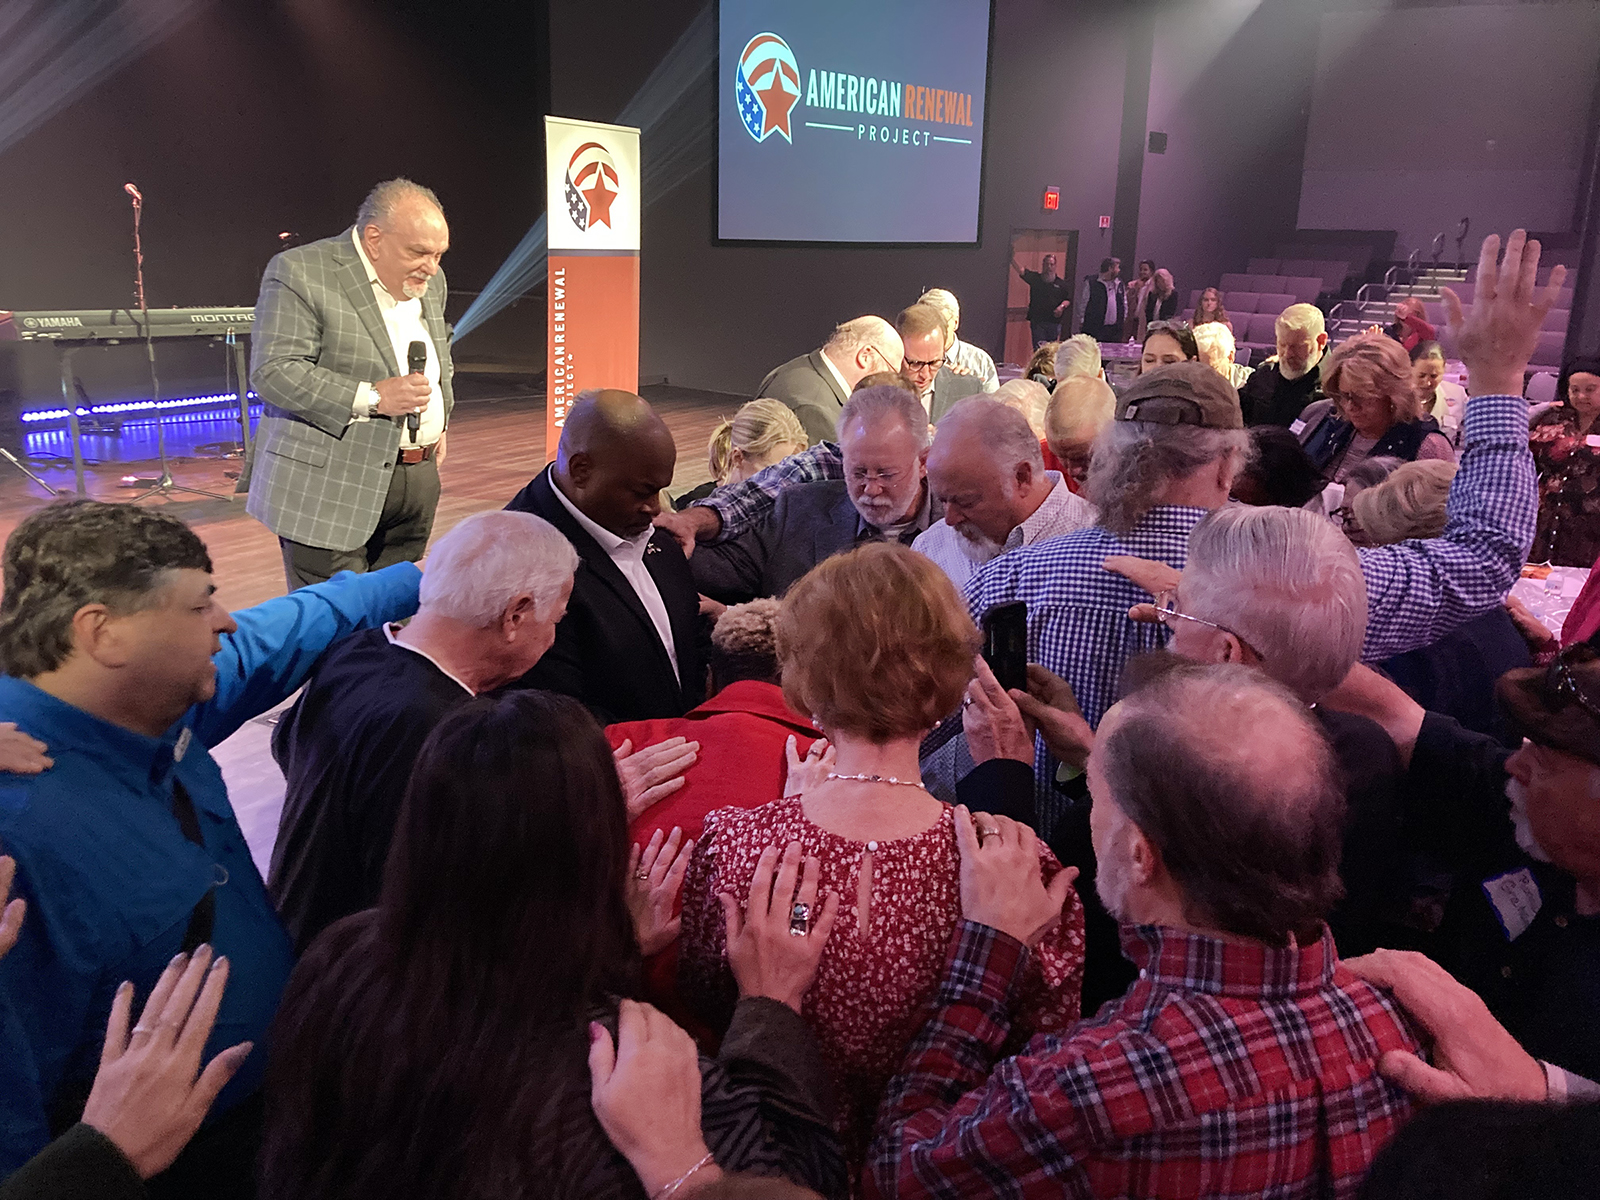 Pastors lay hands and pray for Lt. Gov. Mark Robinson of North Carolina, center left, at a pastors luncheon hosted by the American Renewal Project in Raleigh, North Carolina, on Oct. 10, 2022. The Rev. Gary Miller, on stage, leads the prayer. RNS Photo by Yonat Shimron